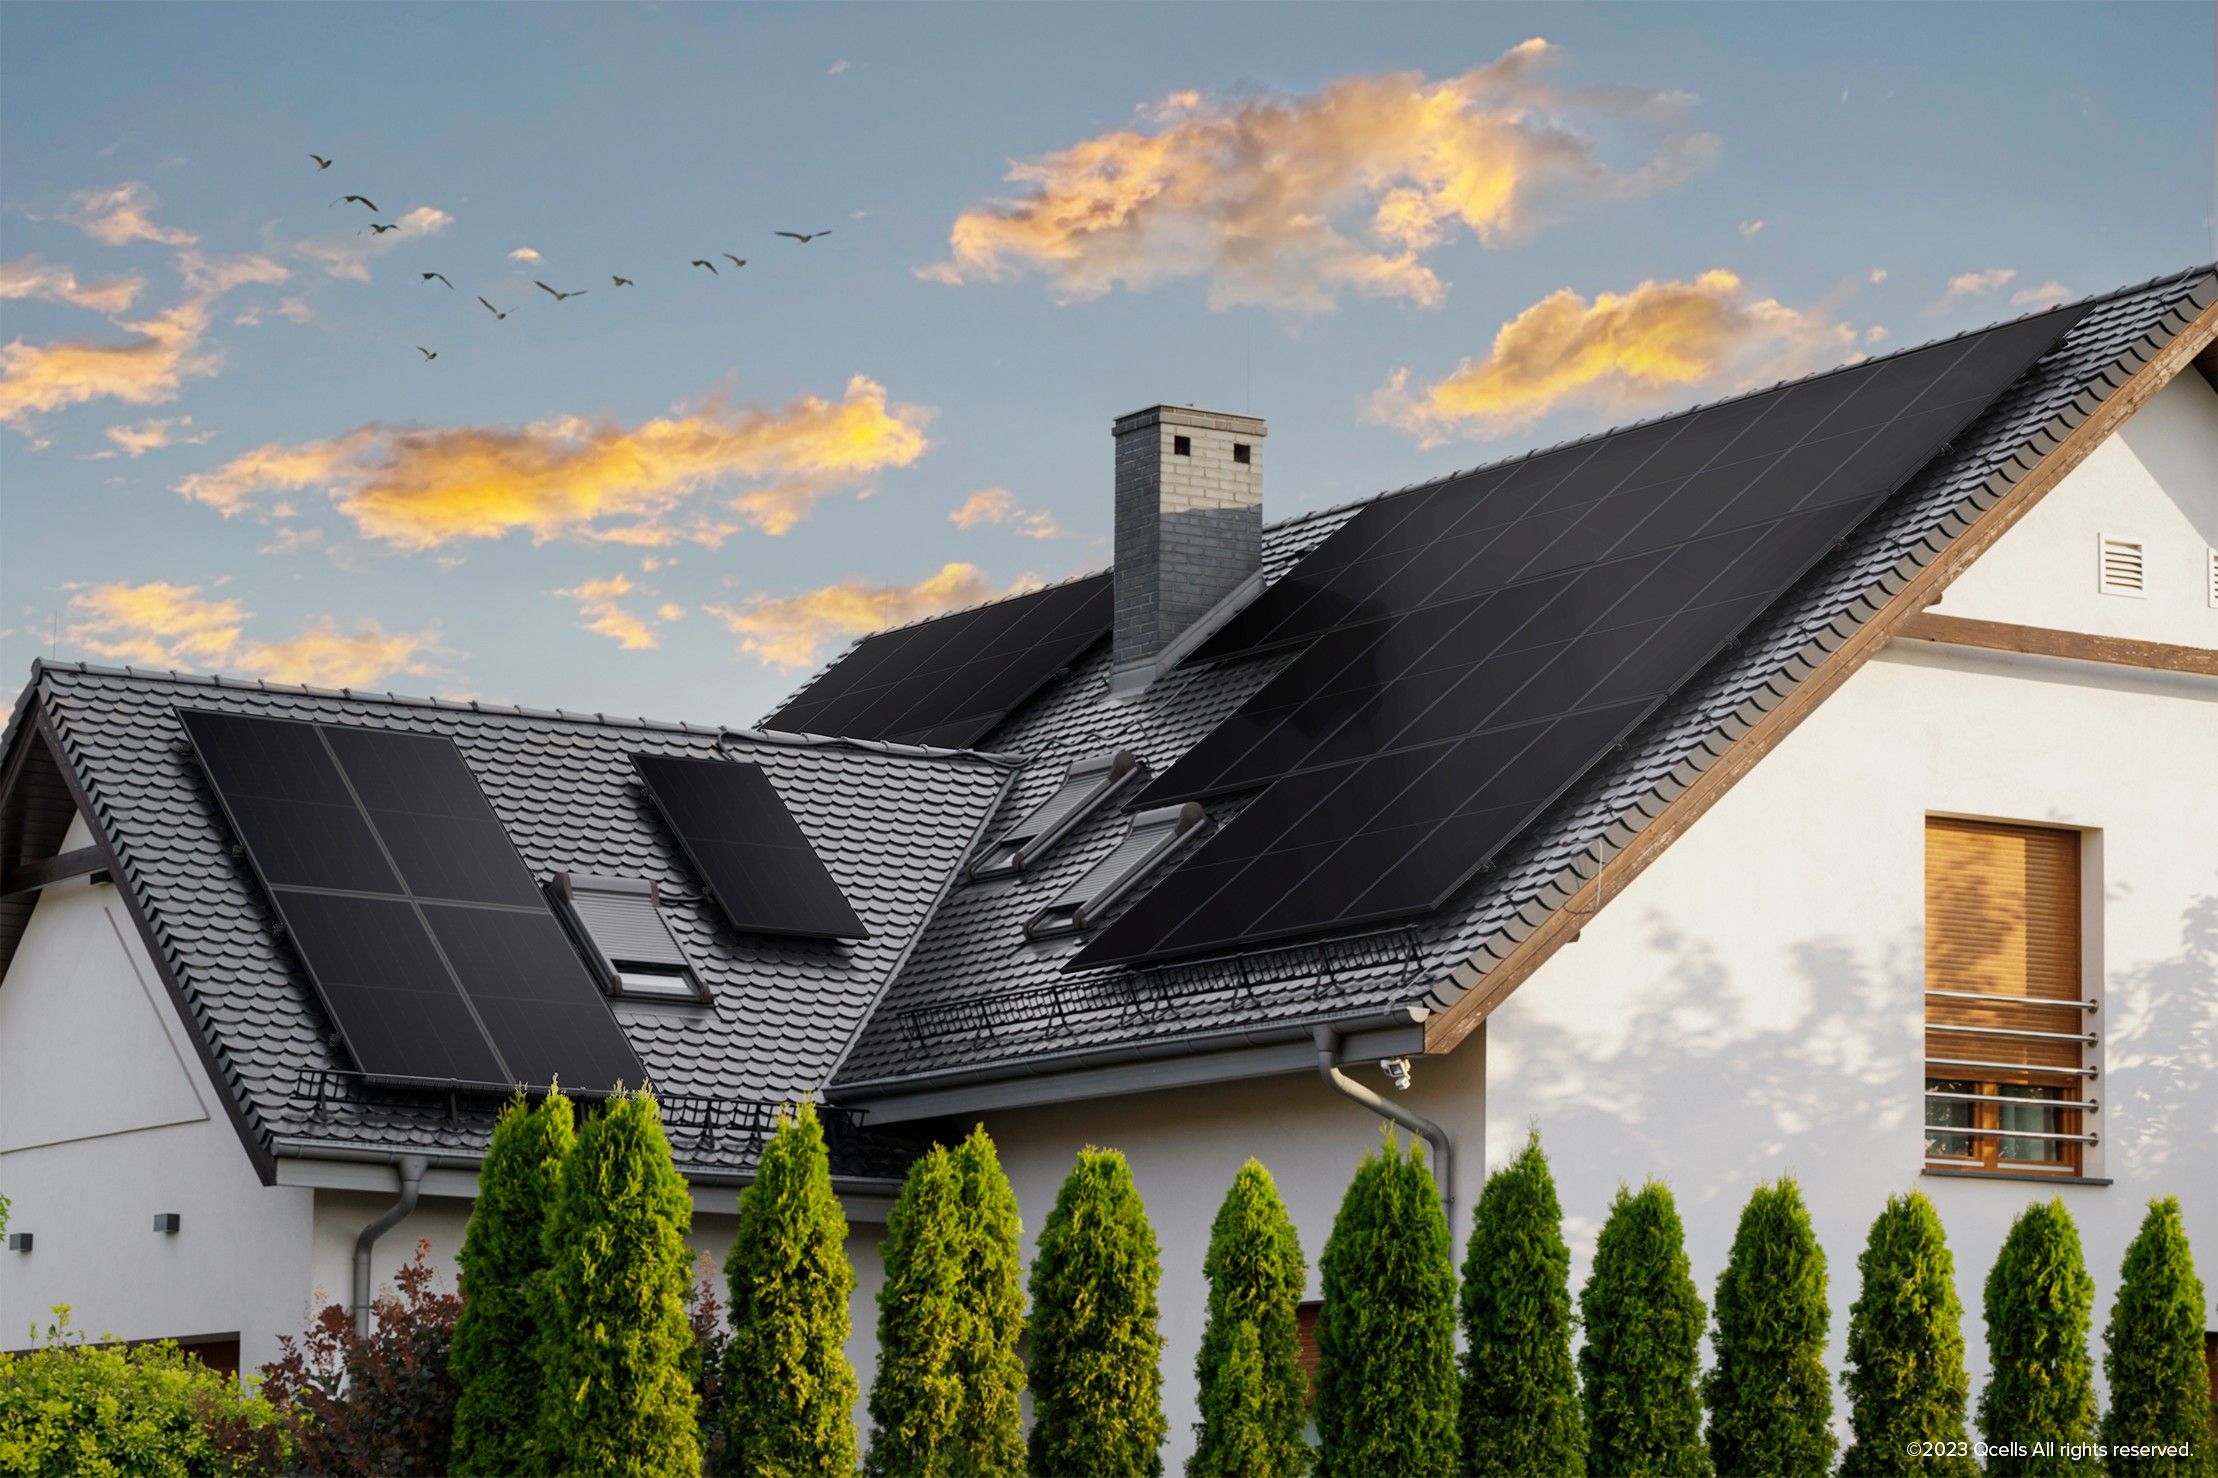 images that illustrate the solar panels increasing home value.